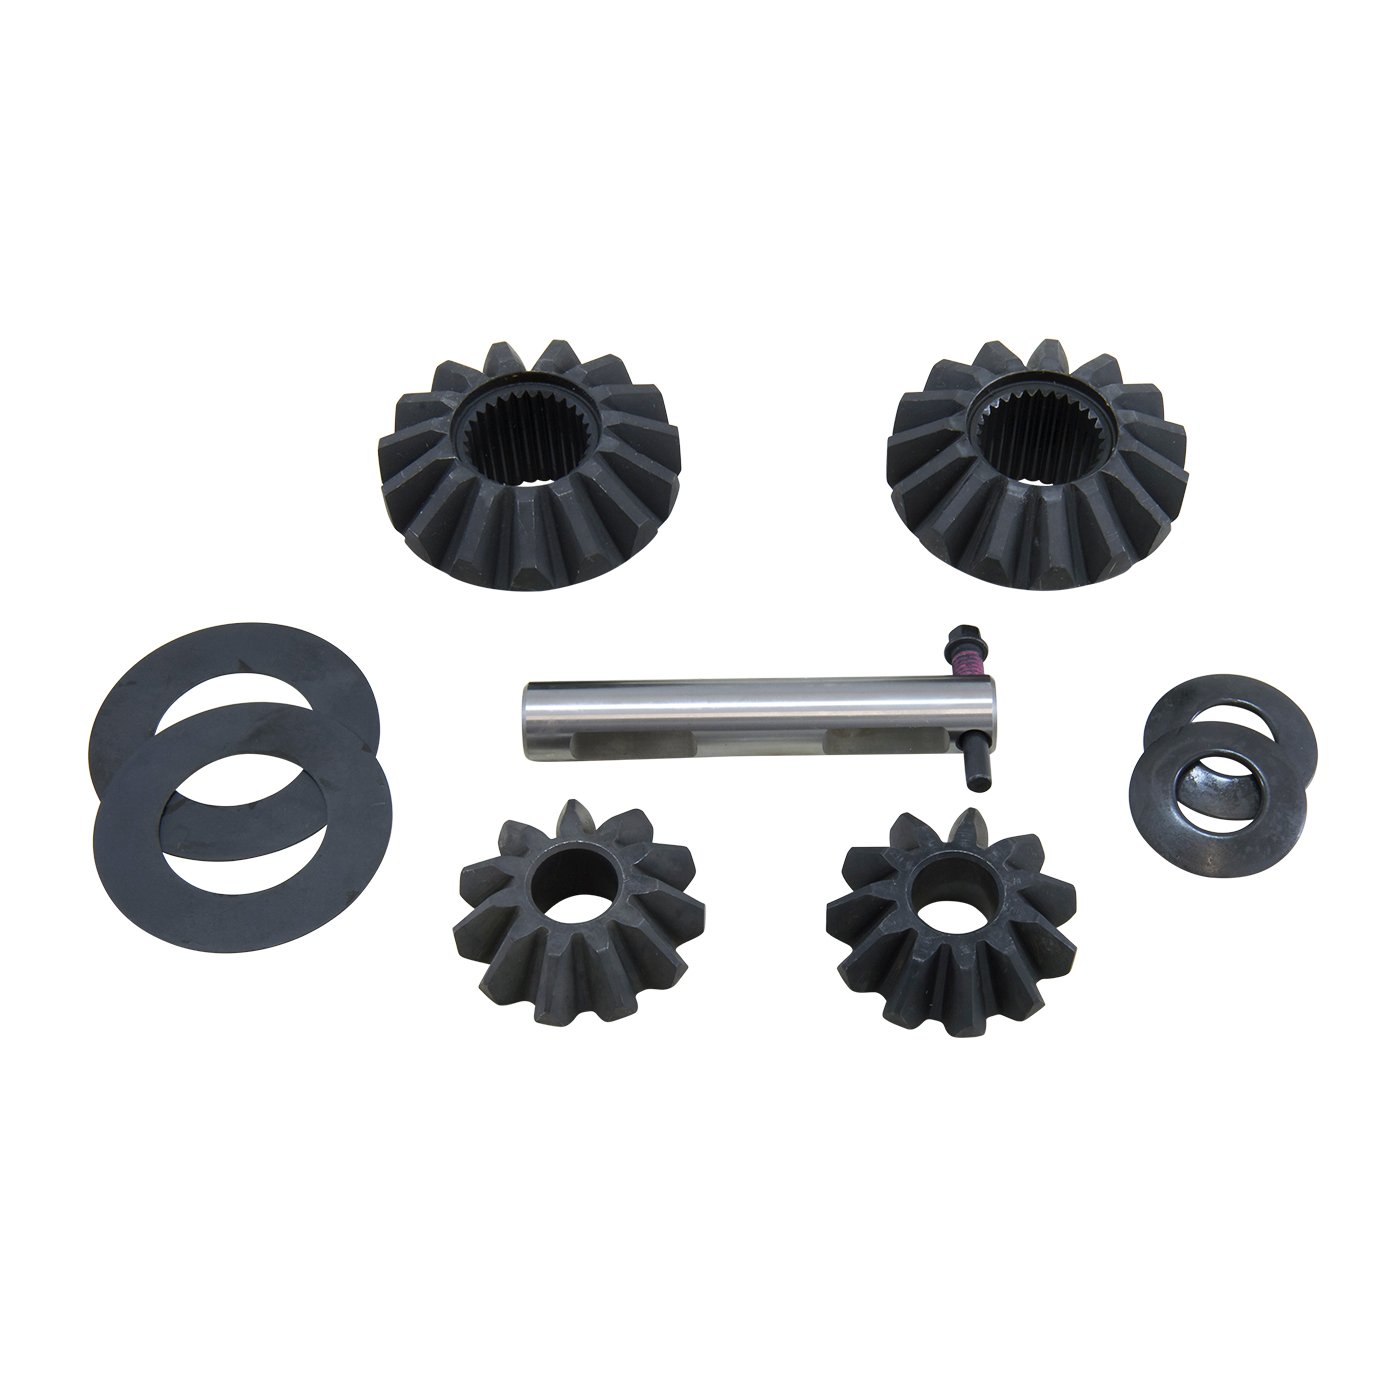 USA Standard Open Spider Gear Set GM 7.625" Rear With Open Differential